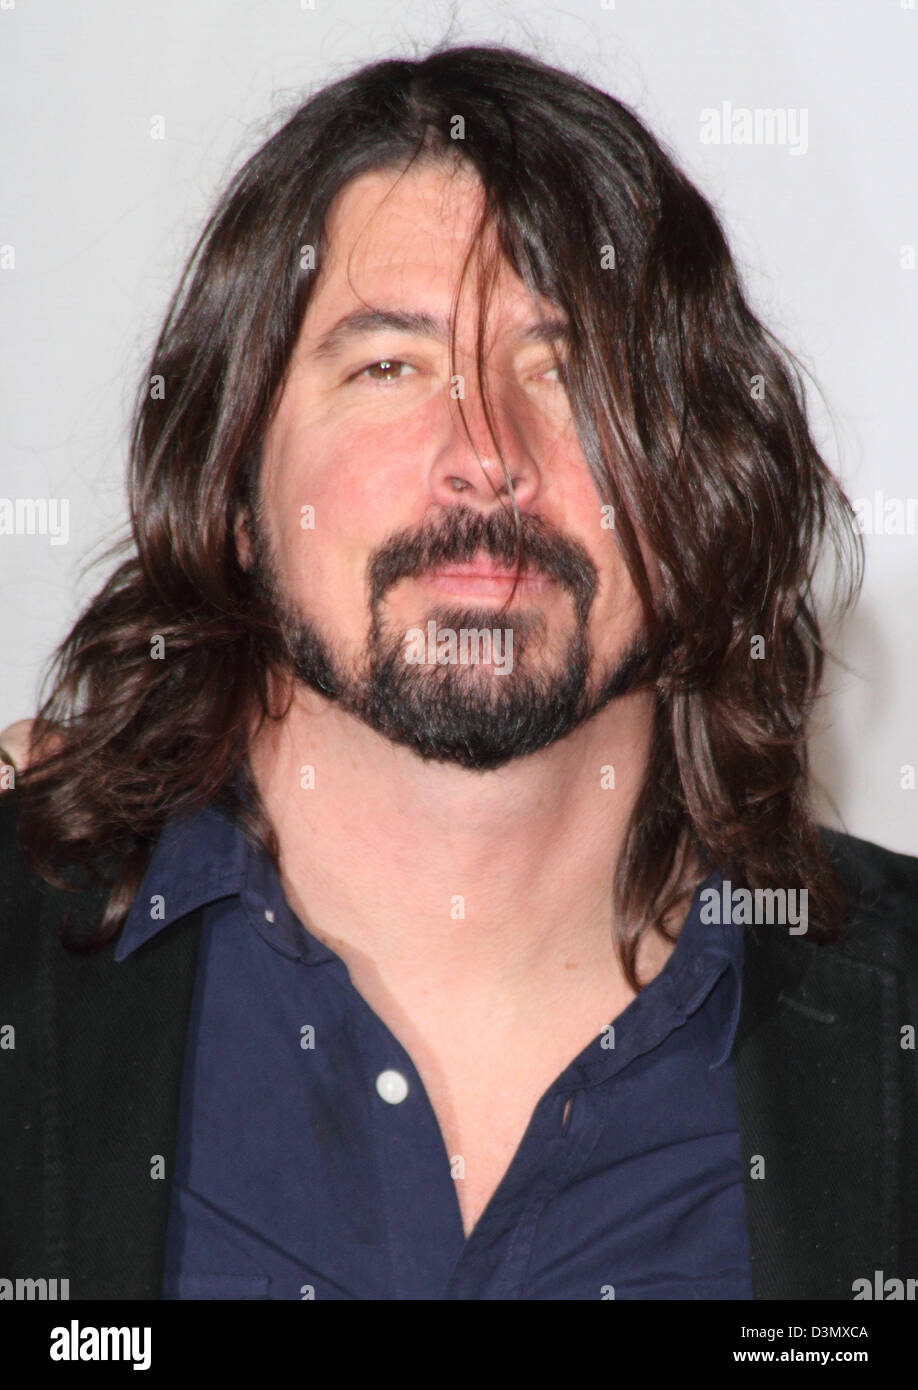 London, UK. 20th February 2013. Dave Grohl at the The 2013 Brit Awards at the O2 Arena, London - February 20th 2013  Photo by Keith Mayhew/ Alamy Live News Stock Photo